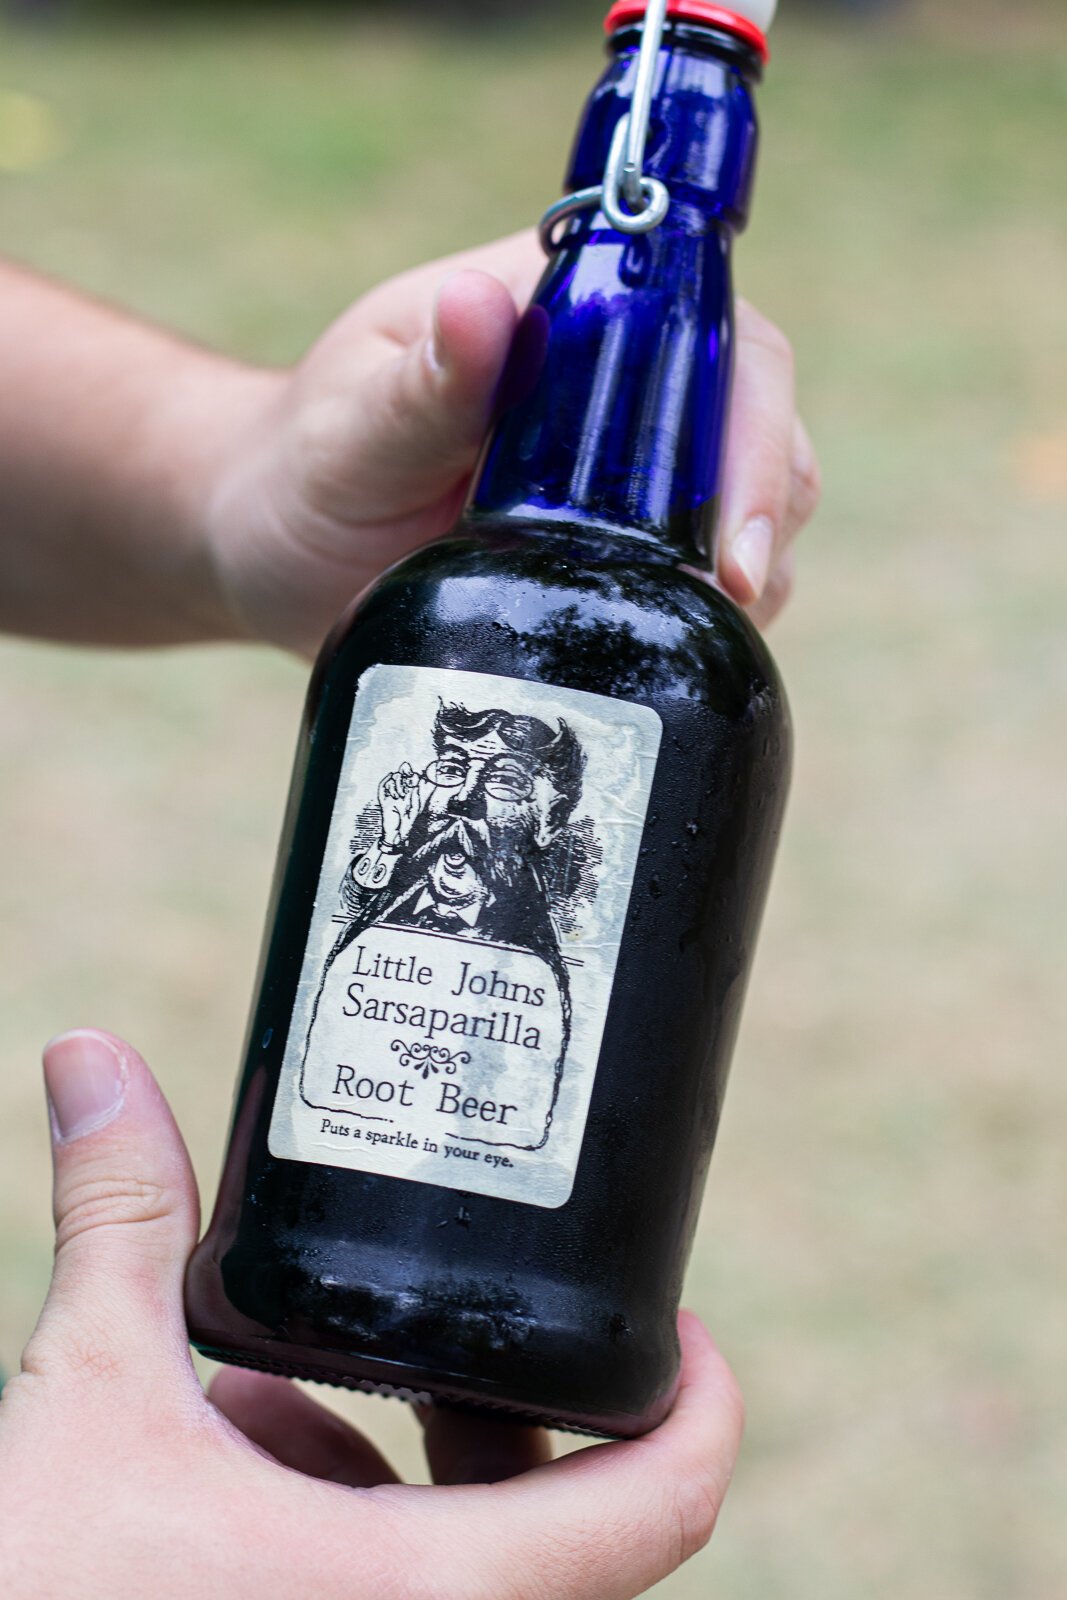 Little Johns Sarsaparilla Rootbeer, a staple of the Johnny Appleseed Festival.